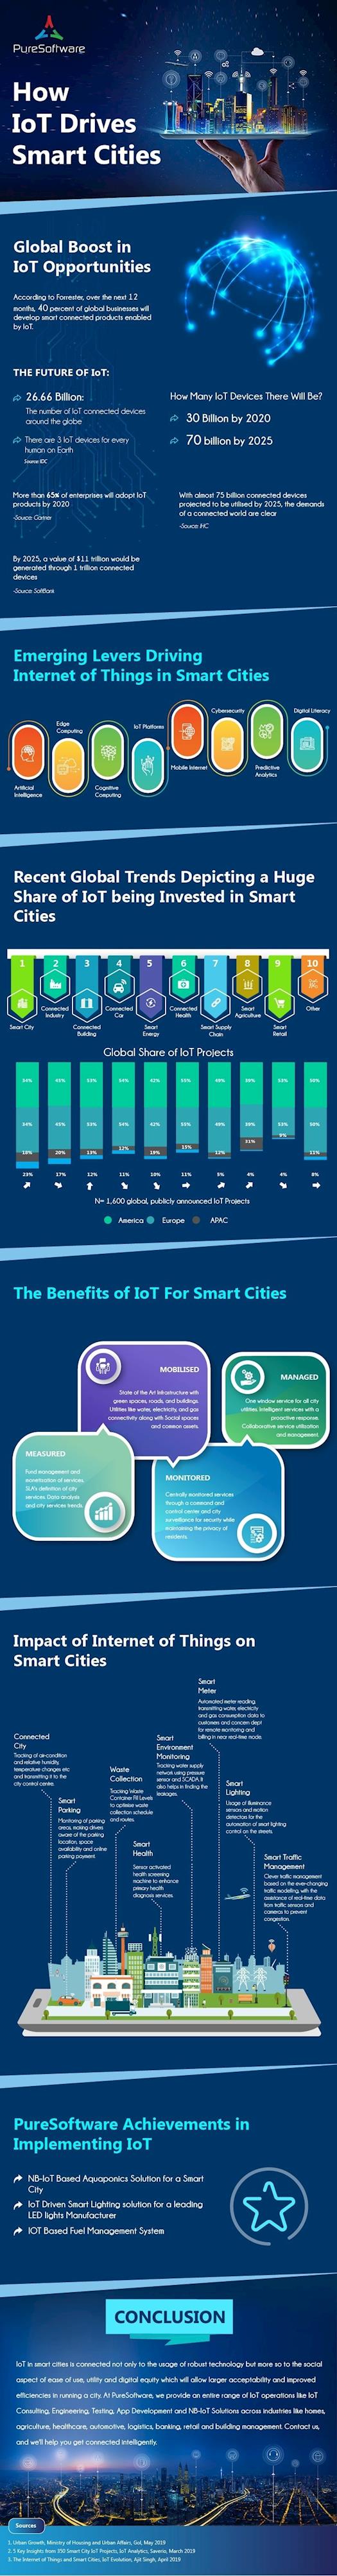 Know-How IoT is Driving the Creation of Future Smart Cities